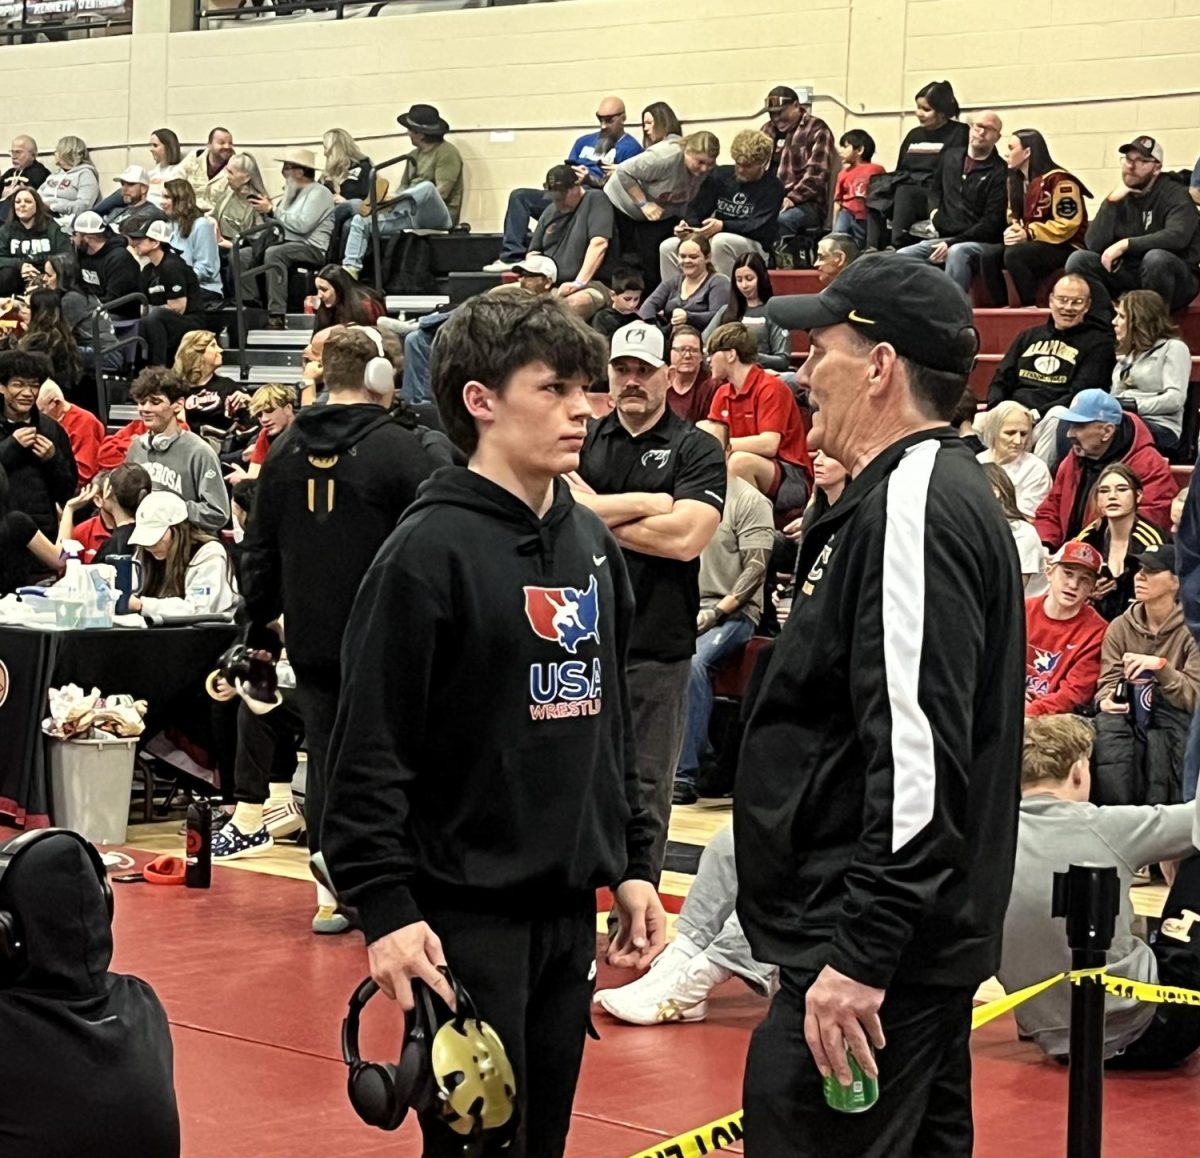 Varsity wrestling captain and state qualifier Noah Jadd ‘26 talks to former Jags wrestling coach, Tim Hill, before wrestling his final match of the regional tournament at Ponderosa High School Feb. 10. Jadd lost by fall in two minutes and 20 seconds to Ponderosa wrestler Jacob Myers ‘24 and placed second overall in the tournament. Jadd will compete at State at Ball Arena from Feb. 15 to Feb. 17. “It was surreal,” Jadd said. “[It was] a great feeling knowing that all of my work paid off. At some points, I questioned myself, doubting if I was good enough. There was a lot of pressure to make it [to] State, but the feeling of pinning my opponent was great, knowing that I made it.”